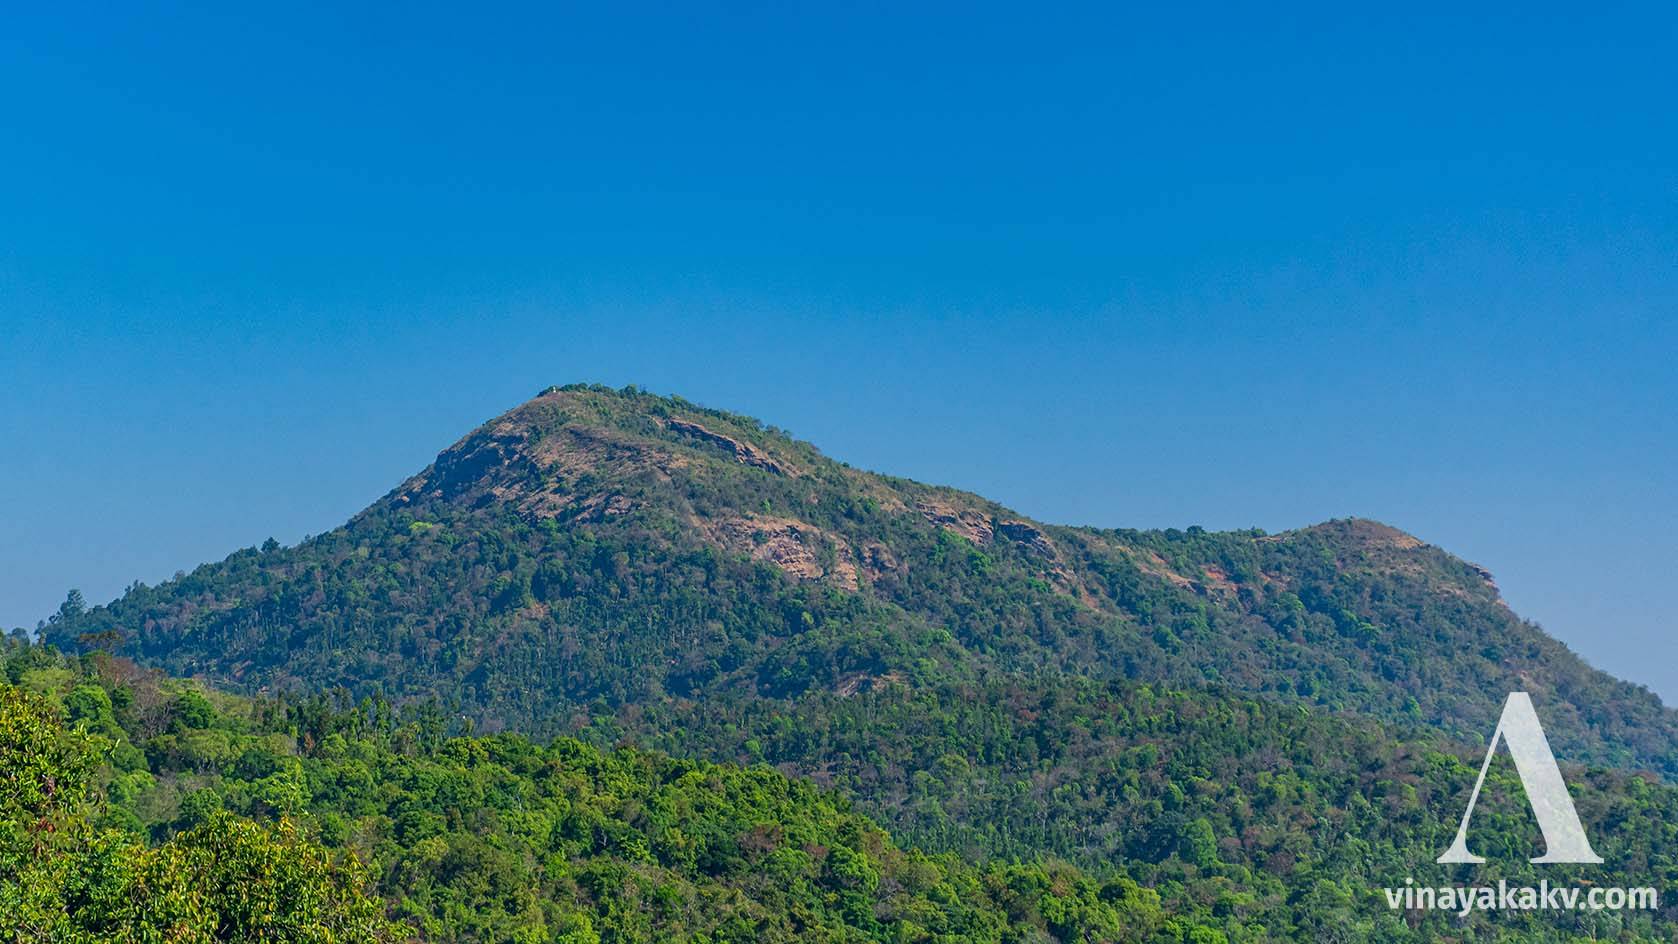 The _Mallarasana Gudda_ peak. The white dot at its top is a statue of Jesus Christ, resembling "Christ the Redeemer" in Rio de Janeiro.